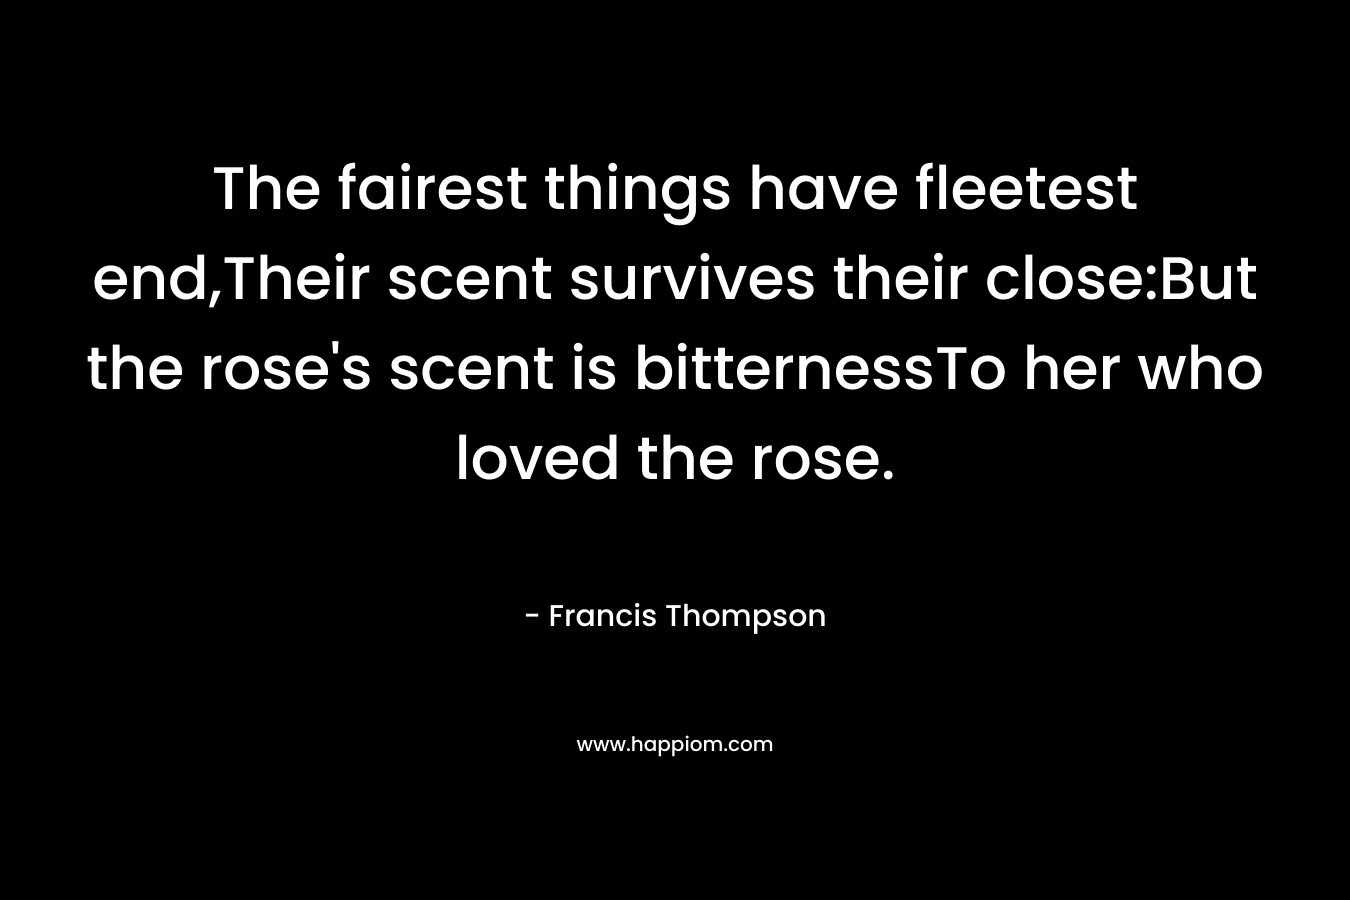 The fairest things have fleetest end,Their scent survives their close:But the rose's scent is bitternessTo her who loved the rose.